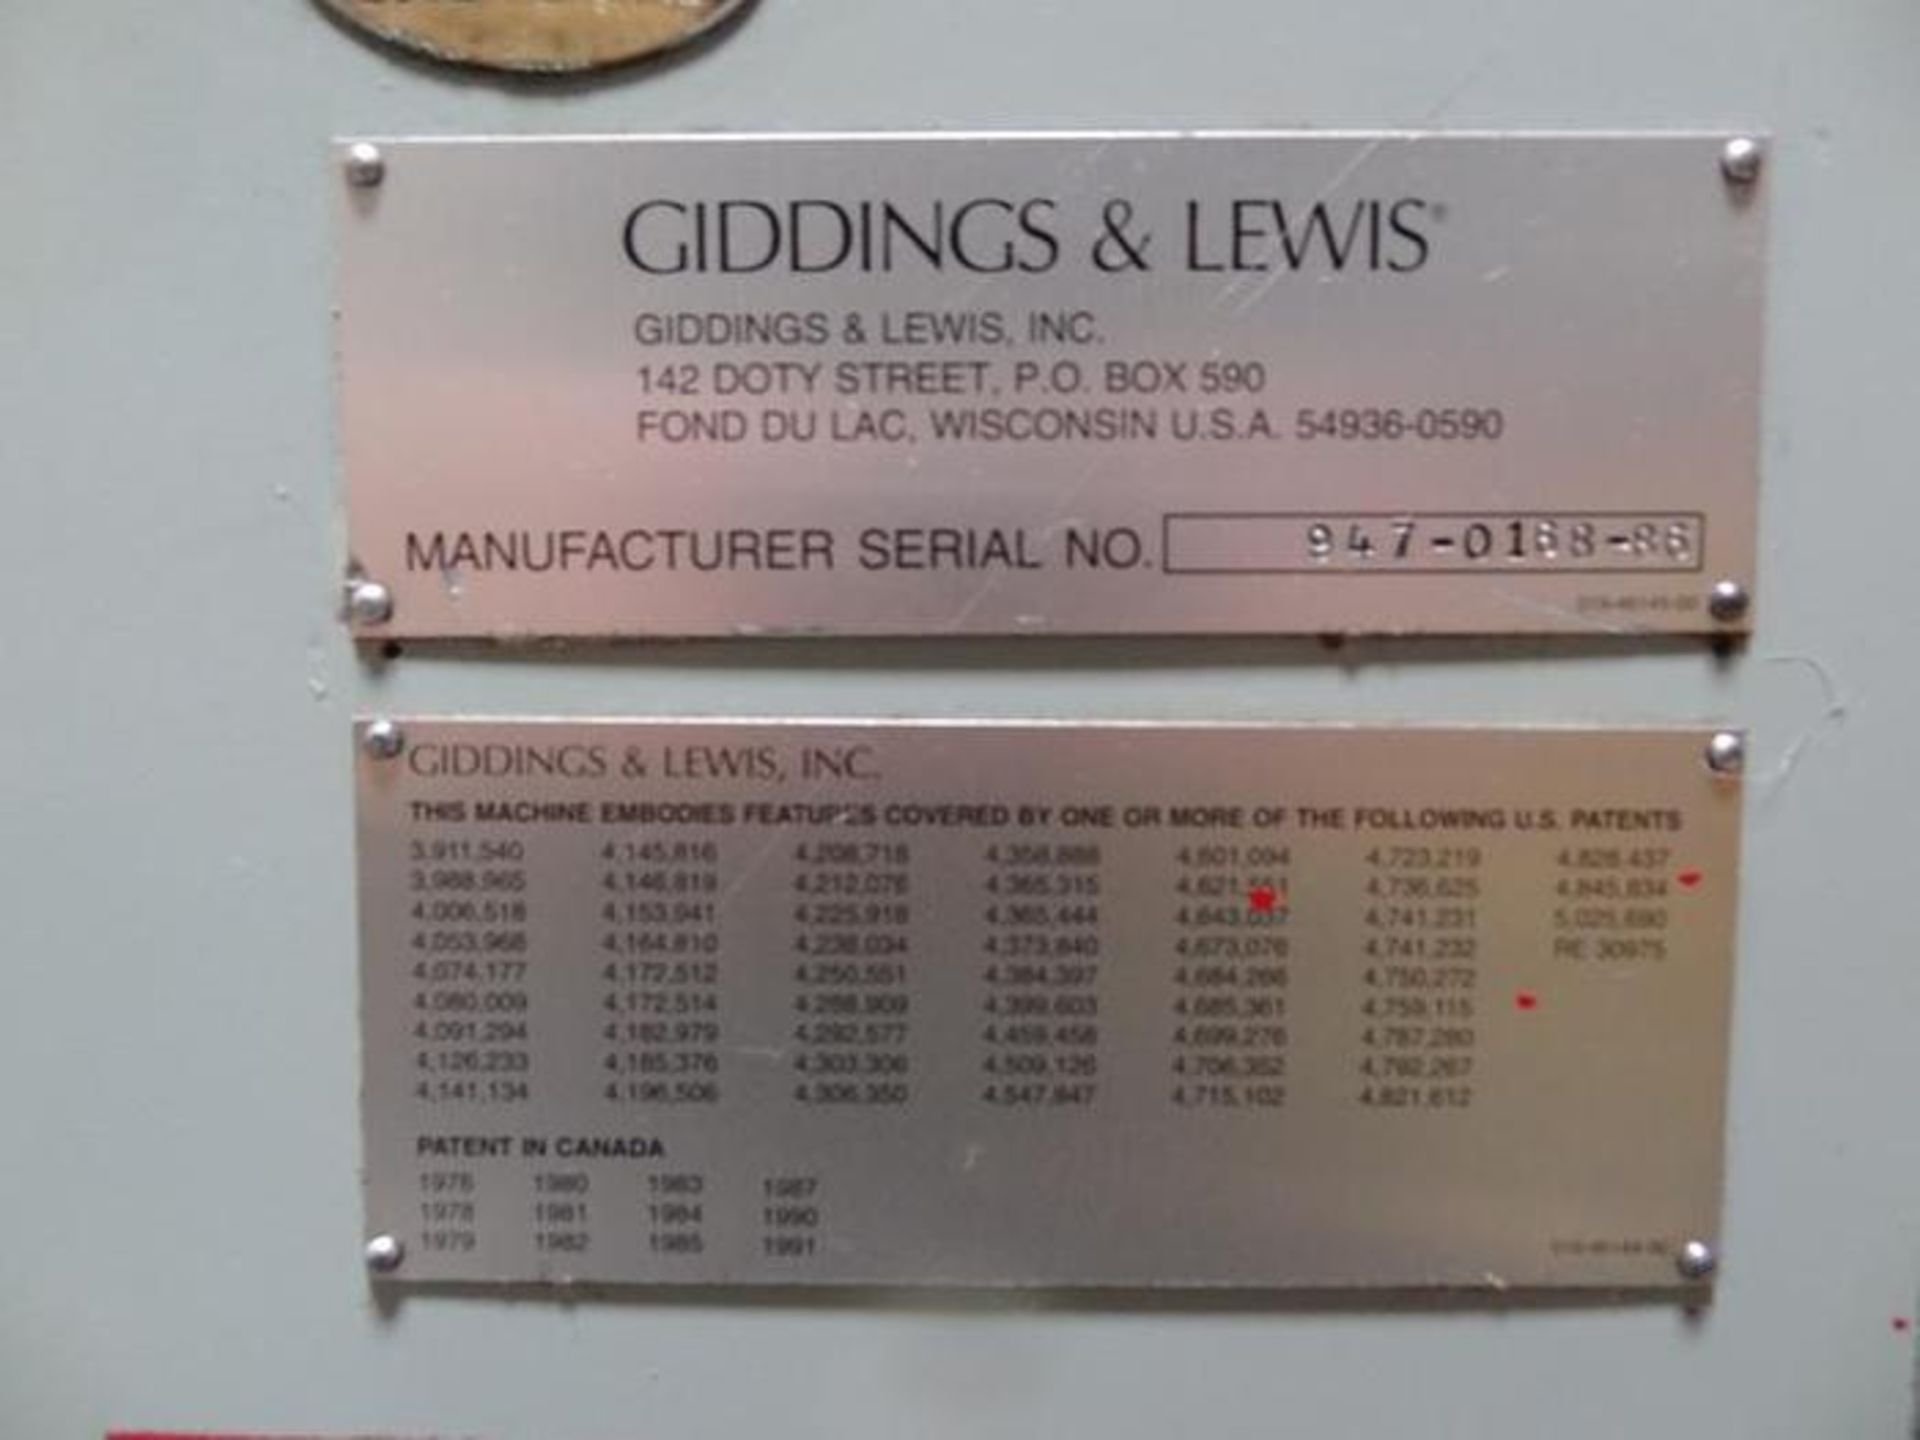 GIDDINGS & LEWIS MODEL HR947 WINSLOWMATIC DRILL GRINDER, SN 947-0168-86, YEAR 1986, LOCATION MI - Image 9 of 11